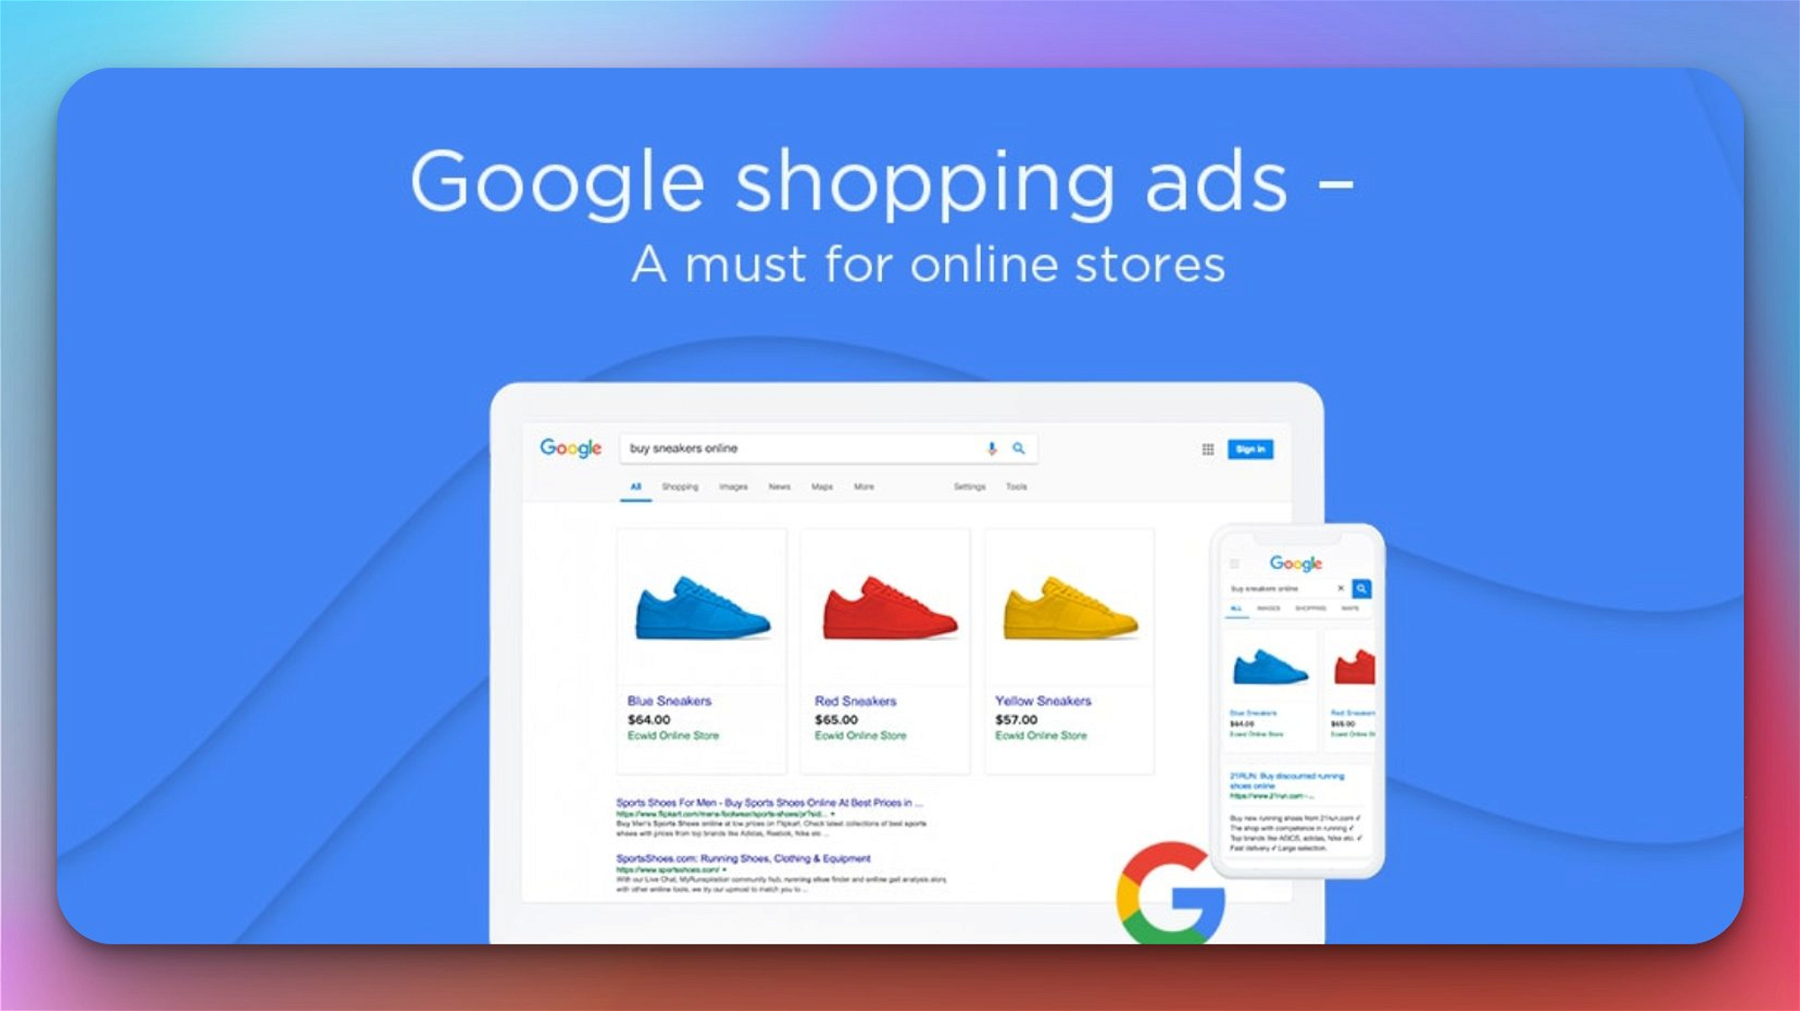 Google Shopping Ads is still alive and true for SaaS products too!